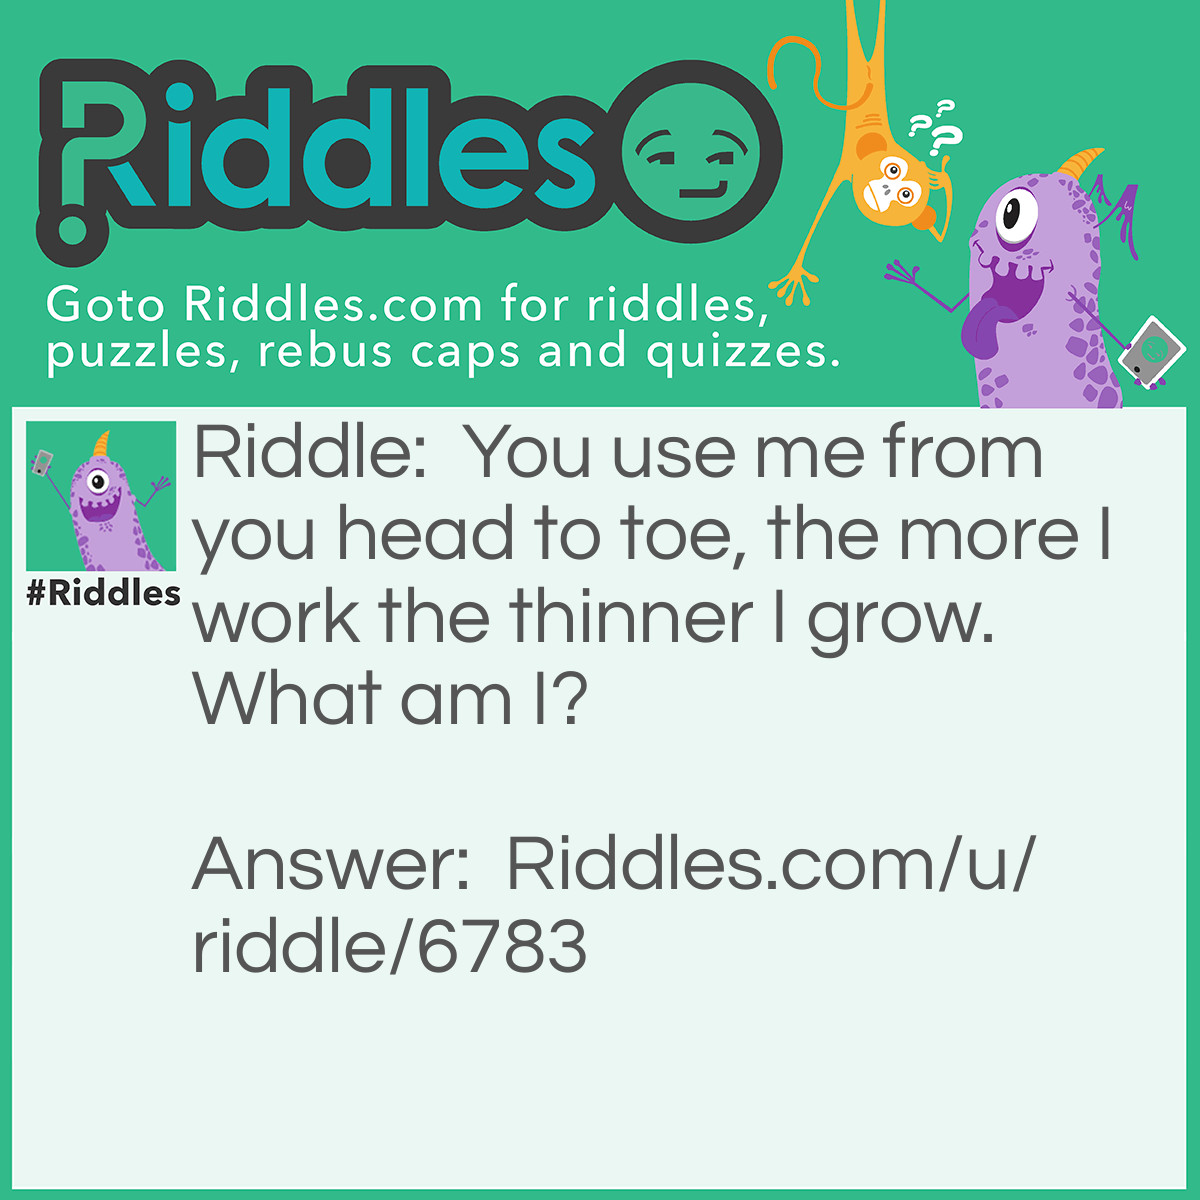 Riddle: You use me from you head to toe, the more I work the thinner I grow. What am I? Answer: A bar of soap.